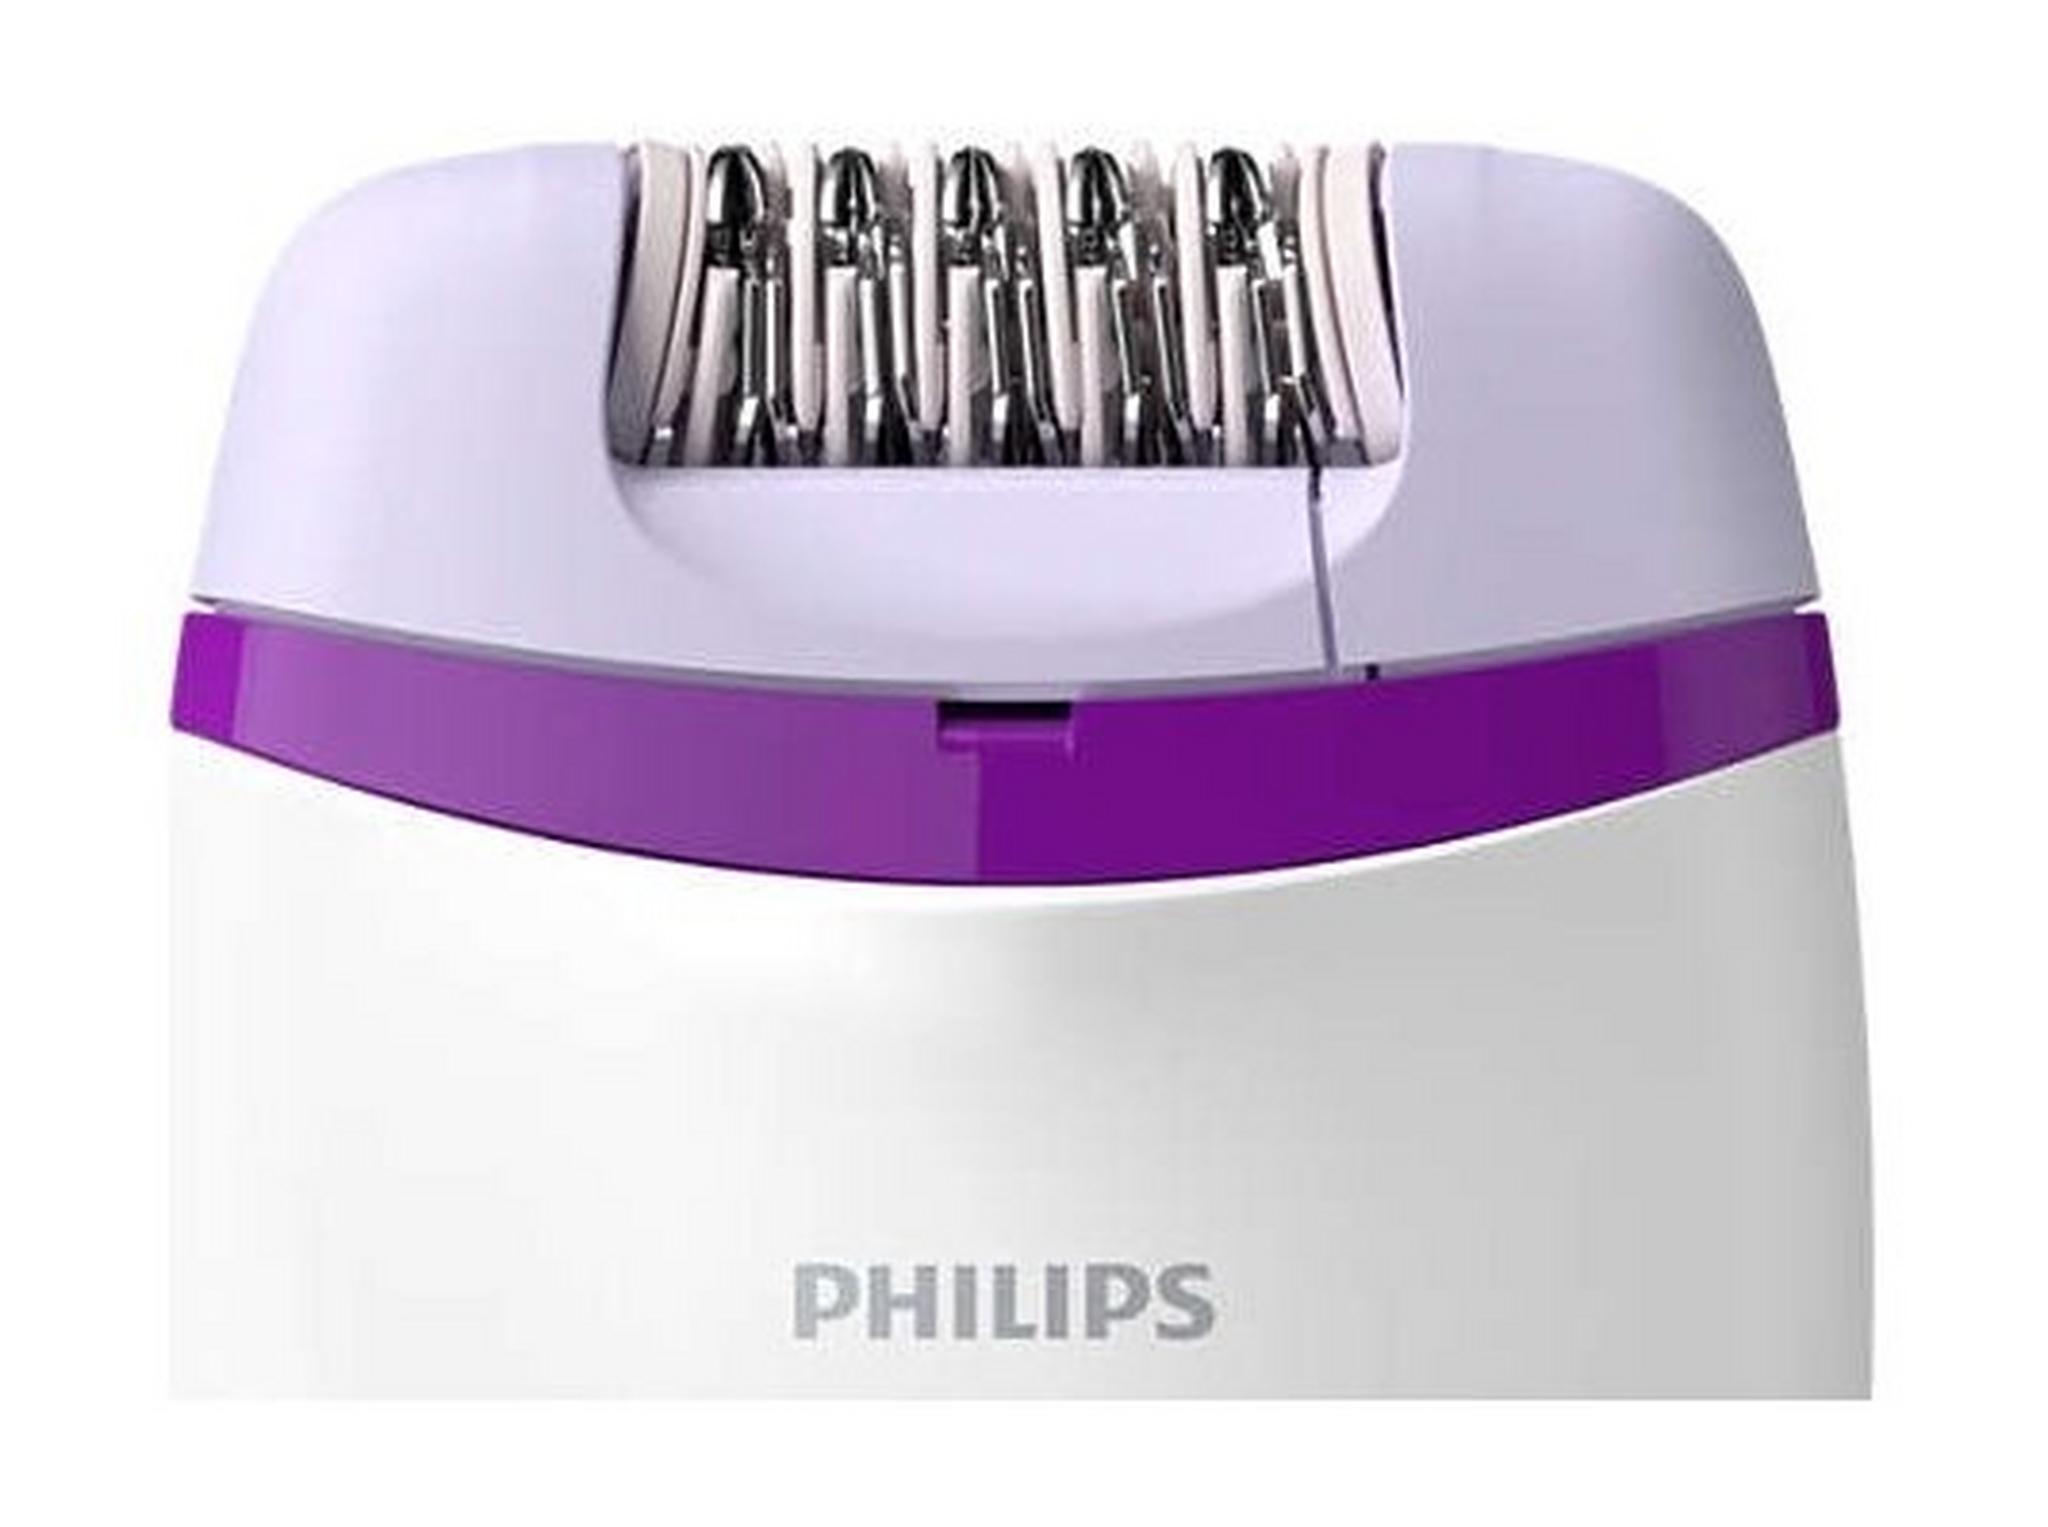 Philips BRE225 Satinelle Essential Corded Compact Epilator